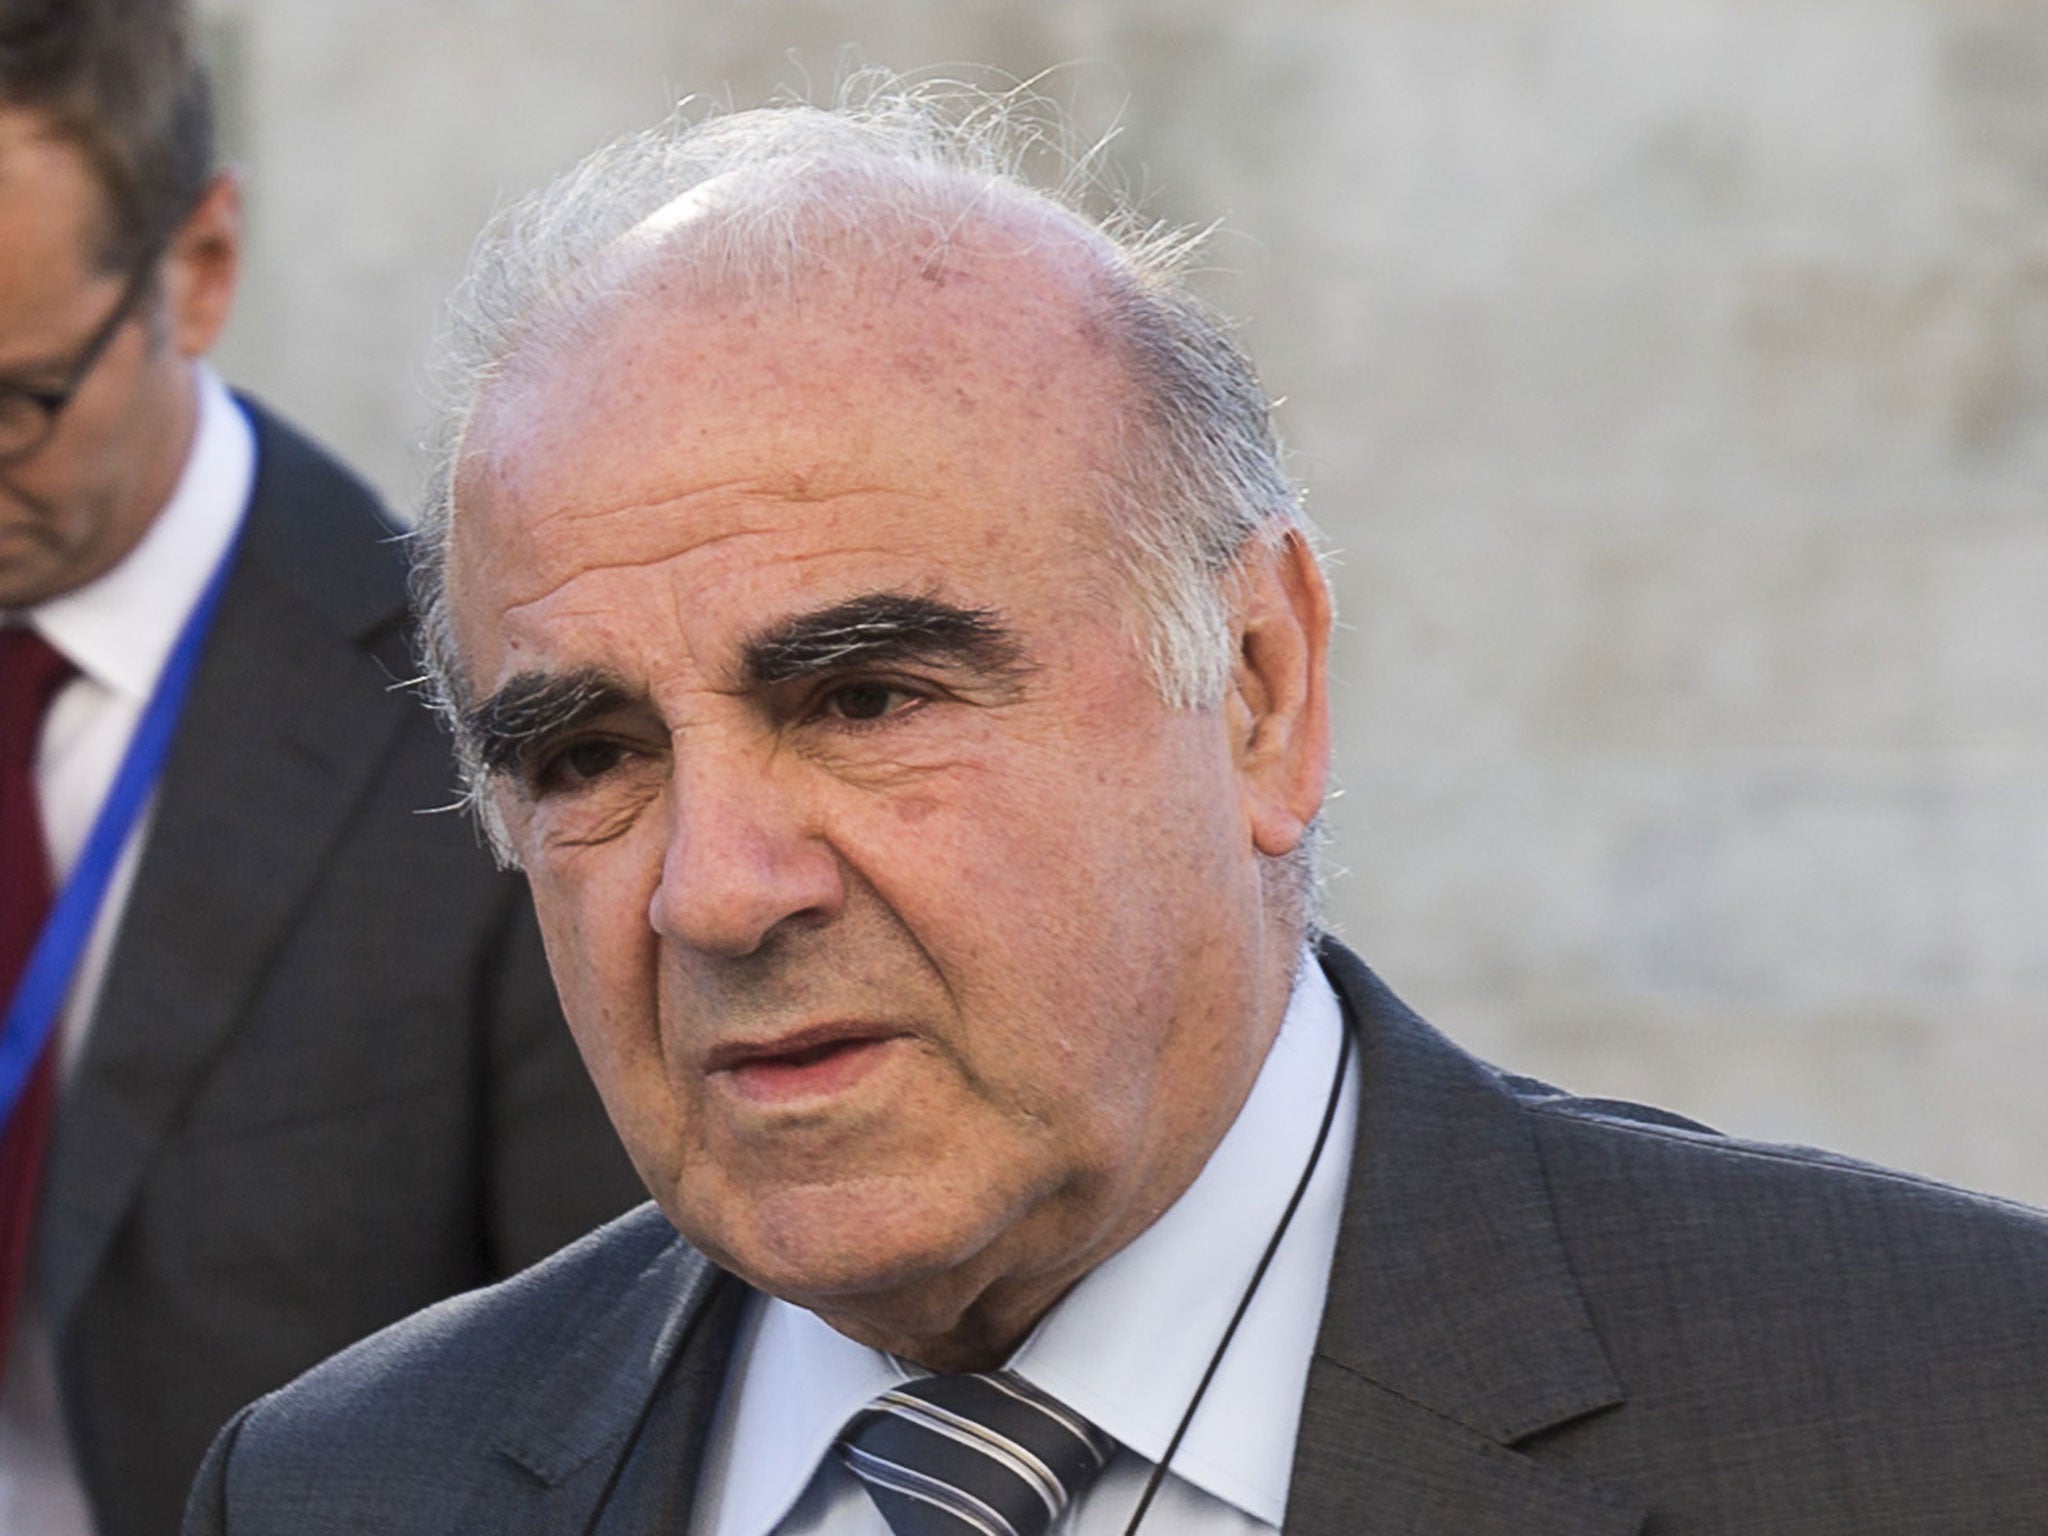 Malta’s Foreign minister, George Vella, said there had been 277 inquiries about the passports